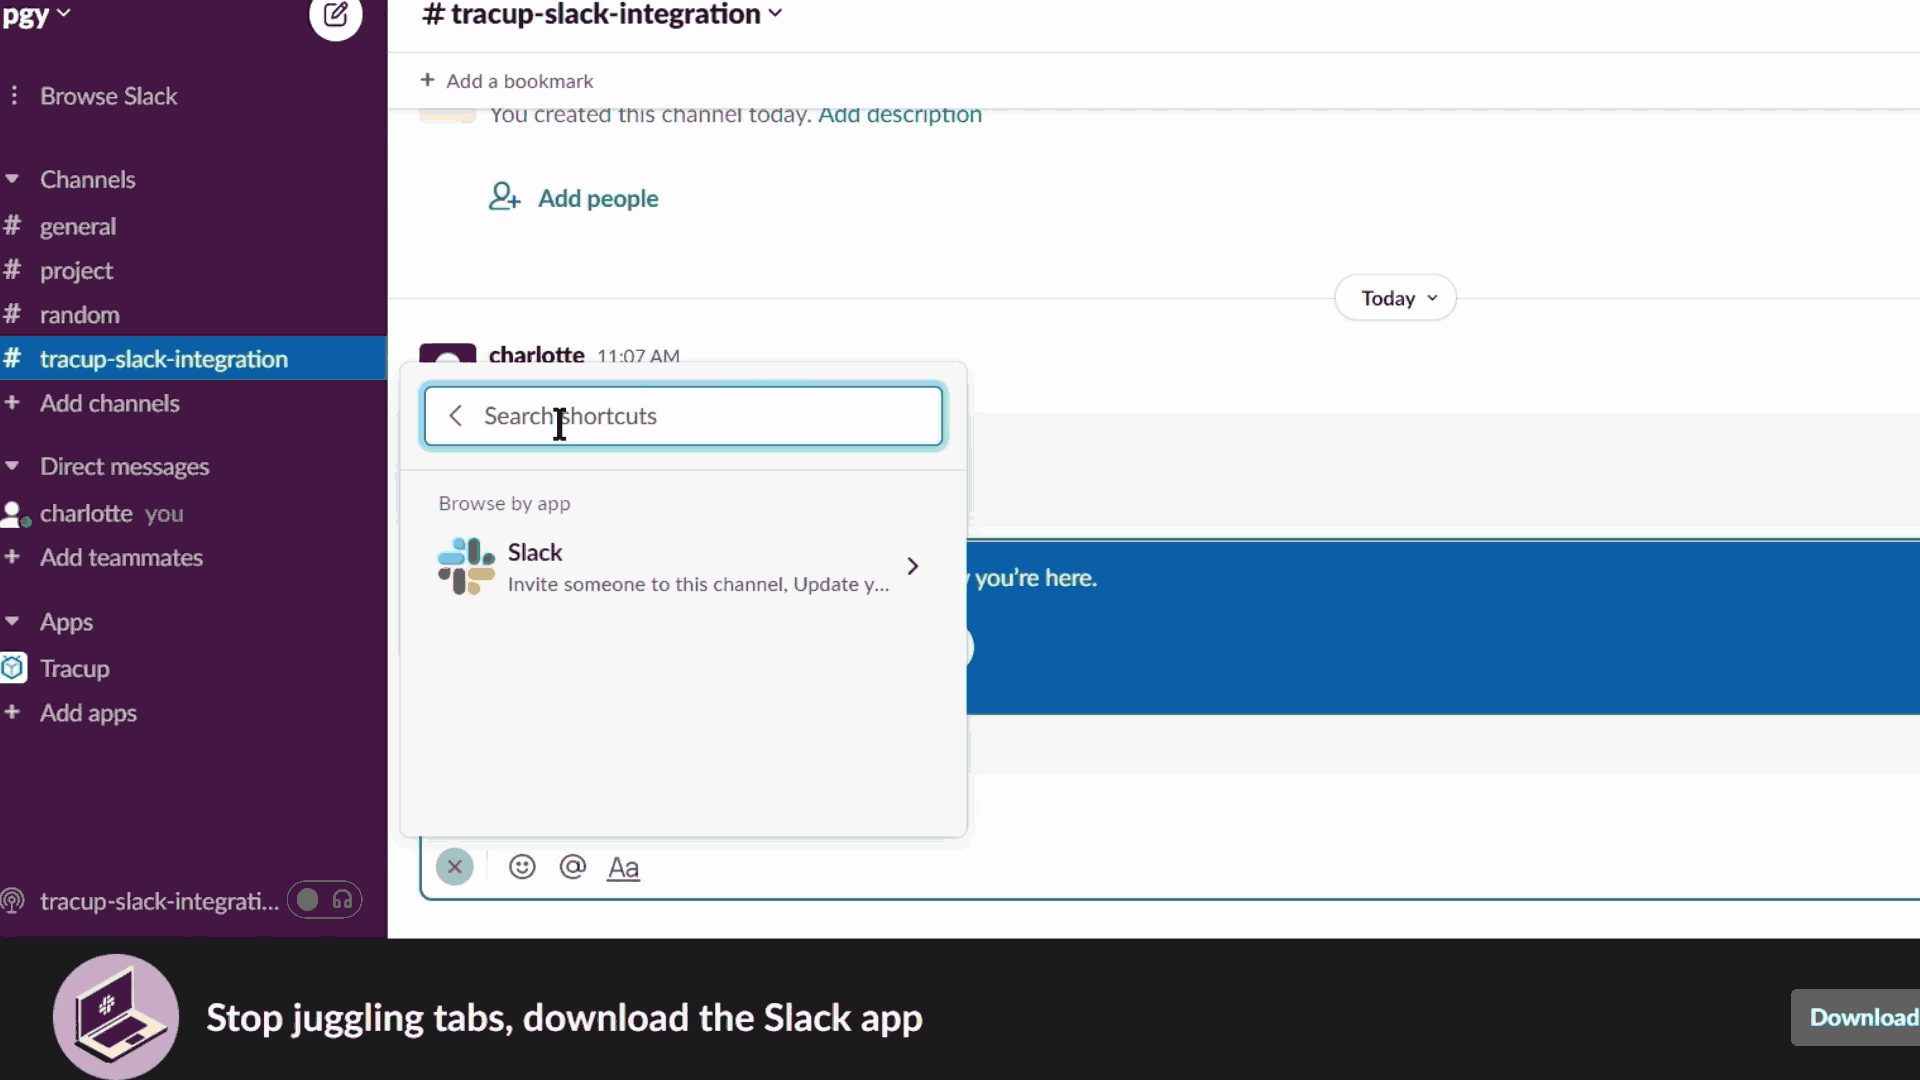 Slack_operation_page_with_Tracup